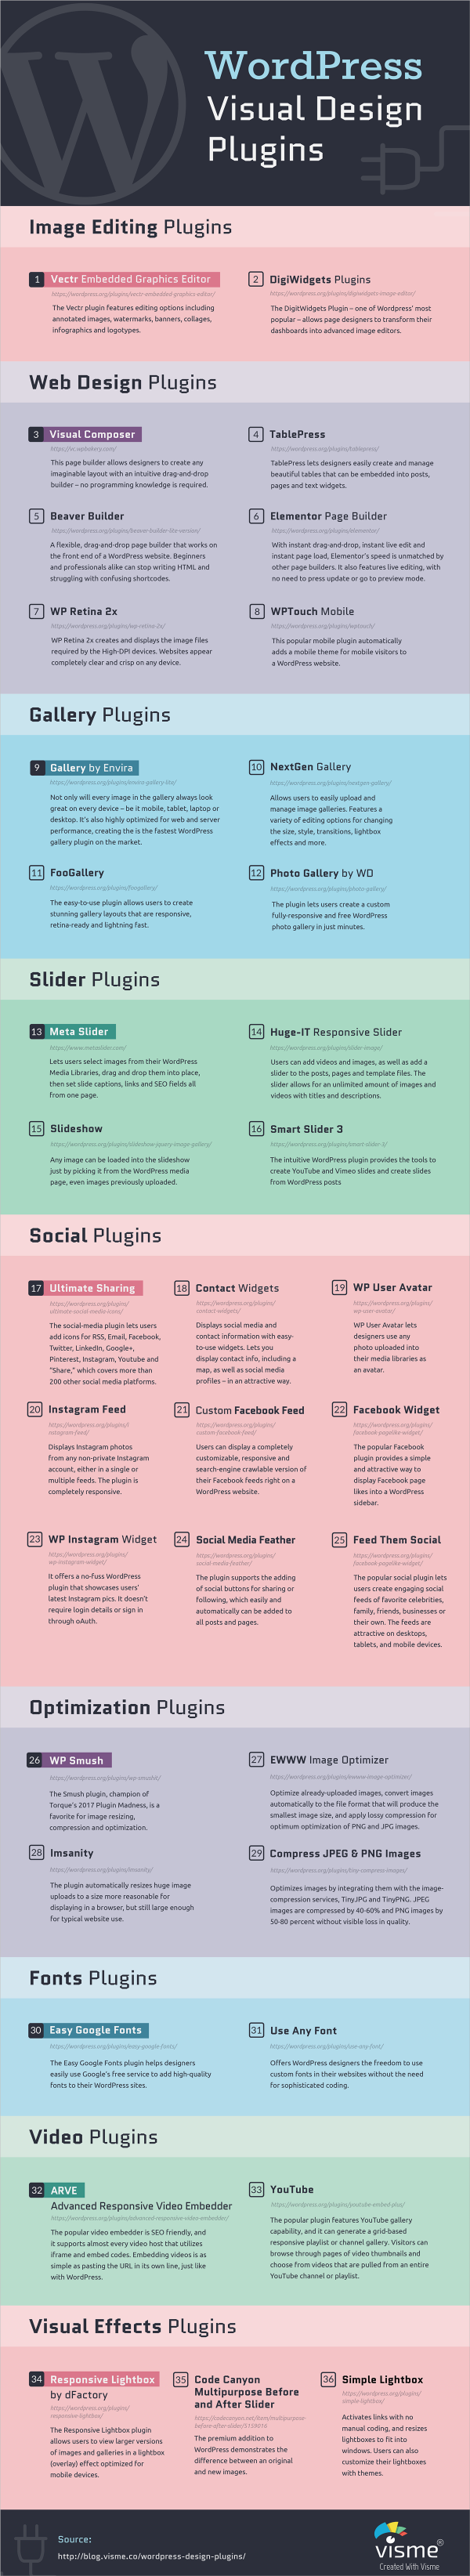 Best plugins for WordPress to Help Design Your Site [Infographic ...